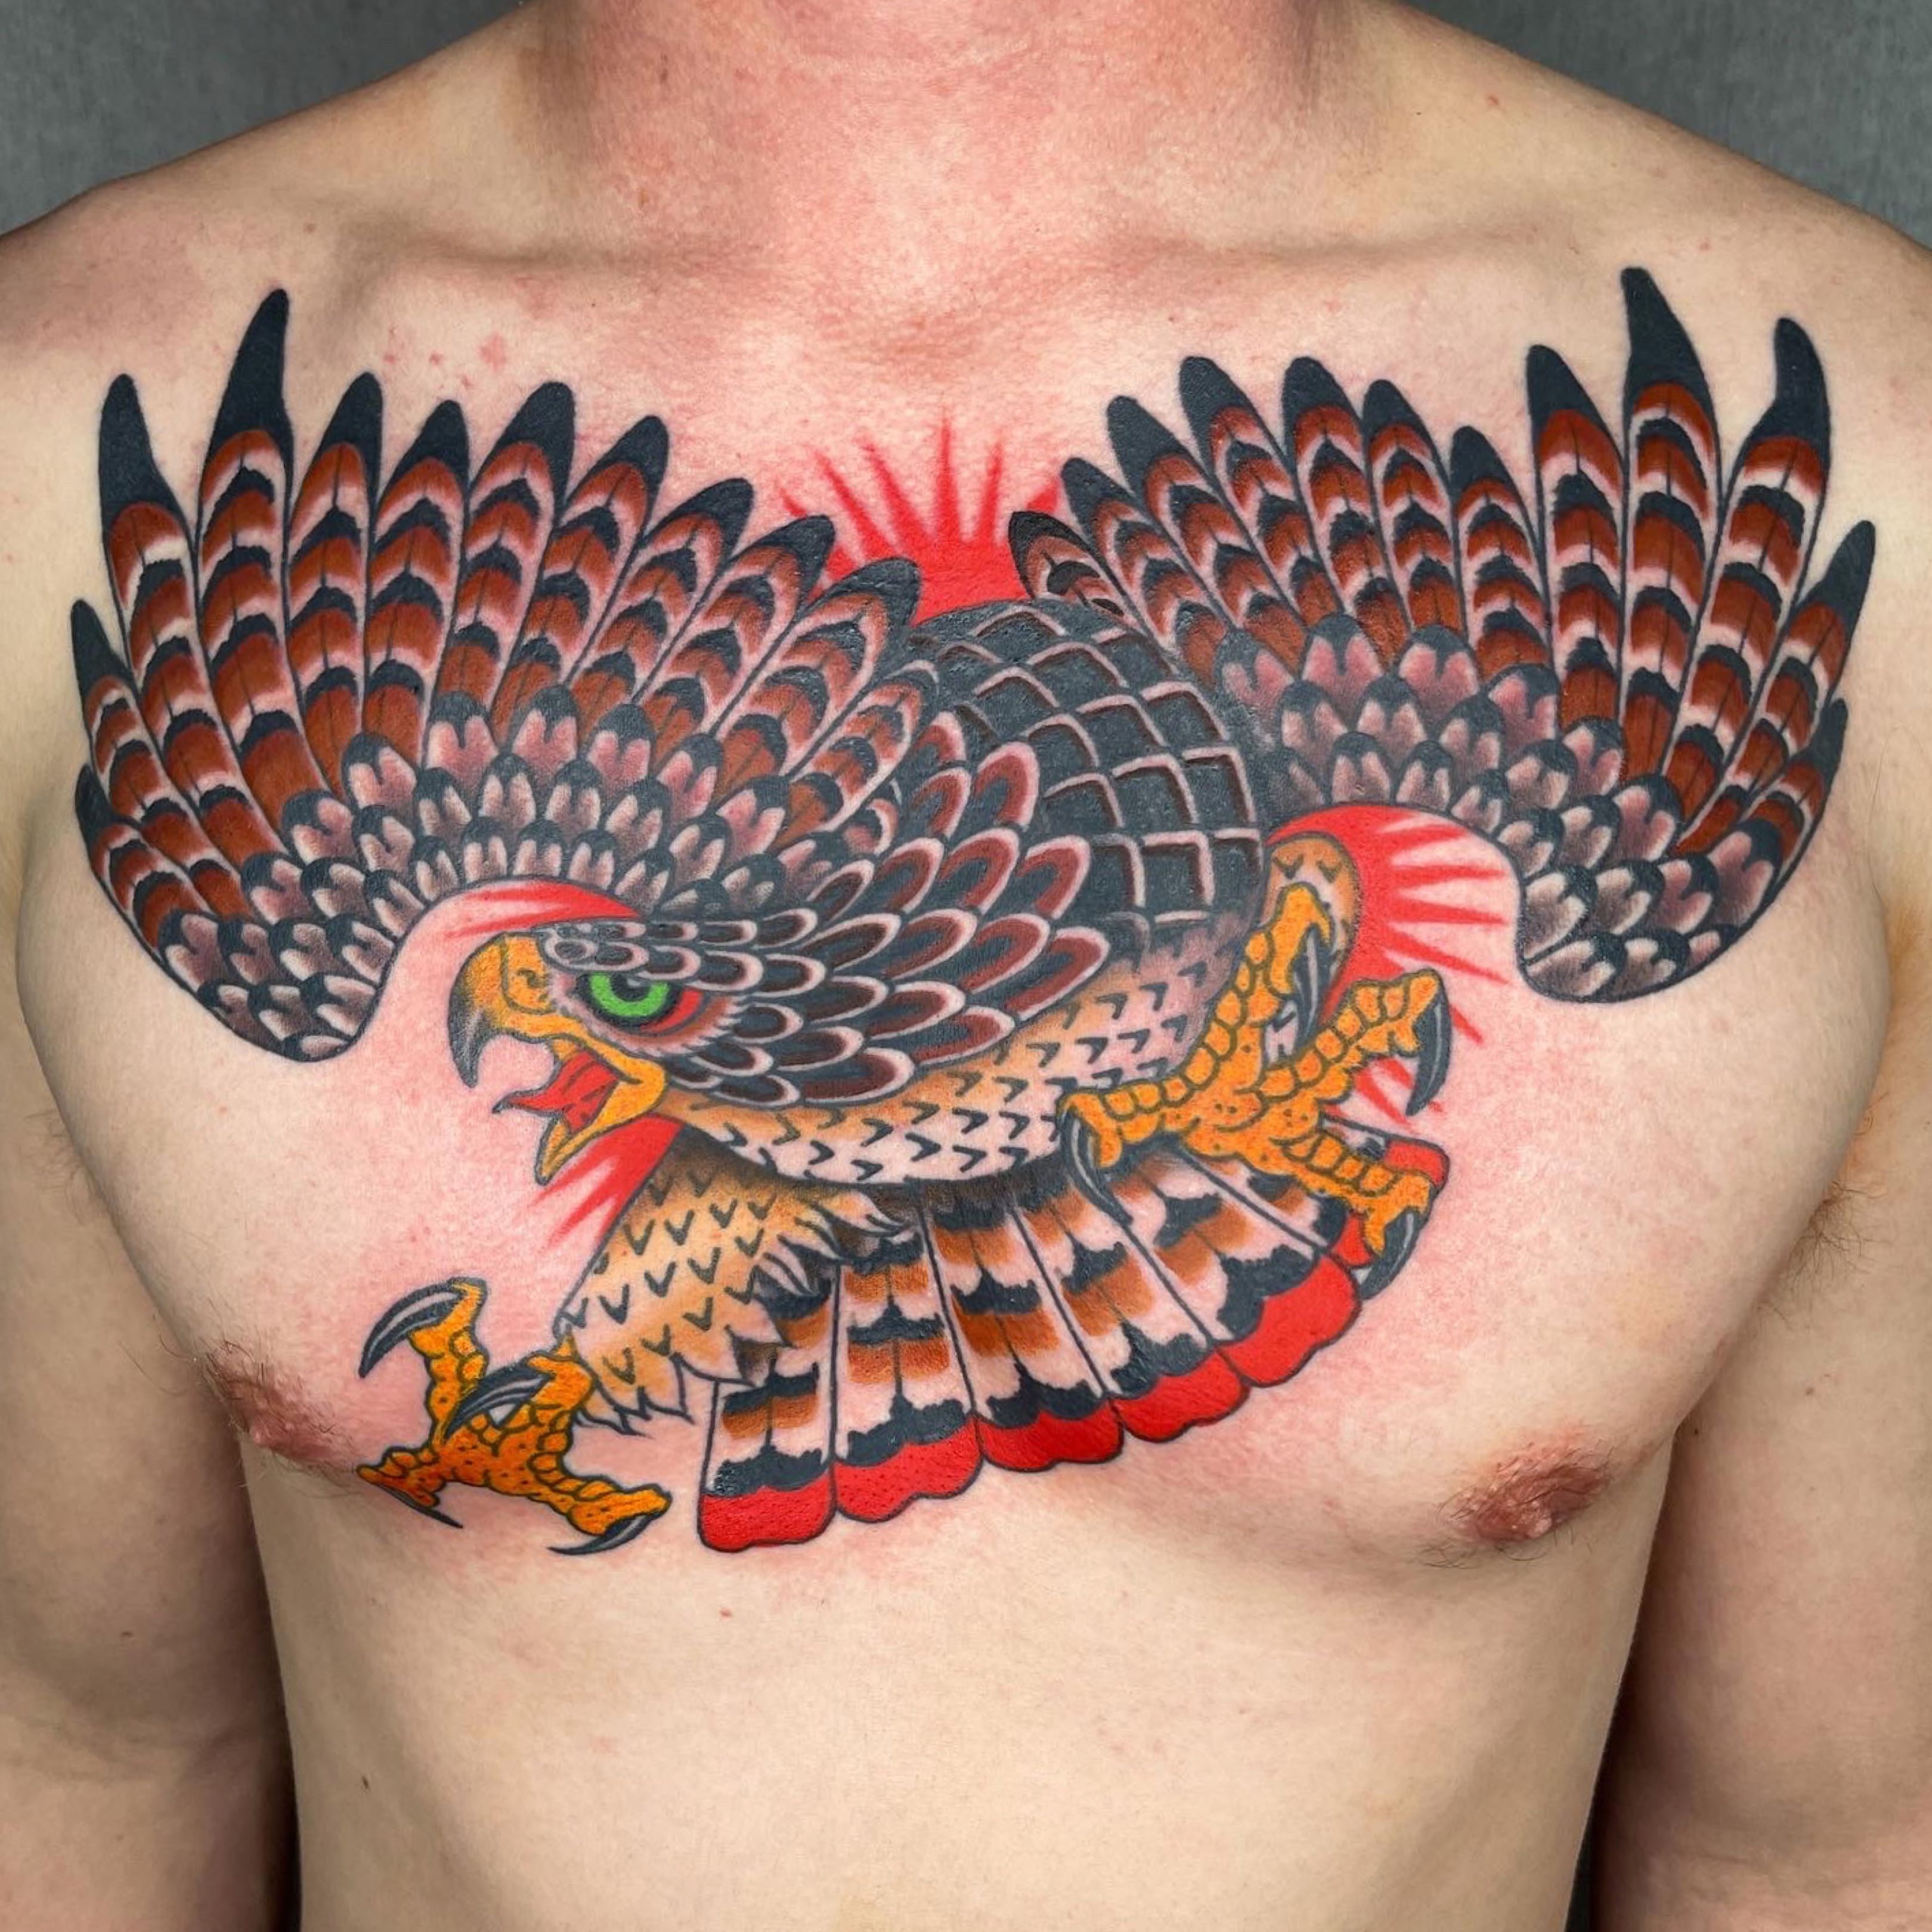 10 American Traditional Tattoos That Will Never Go Out of Style | by  Ultimate tattoo designs | Medium